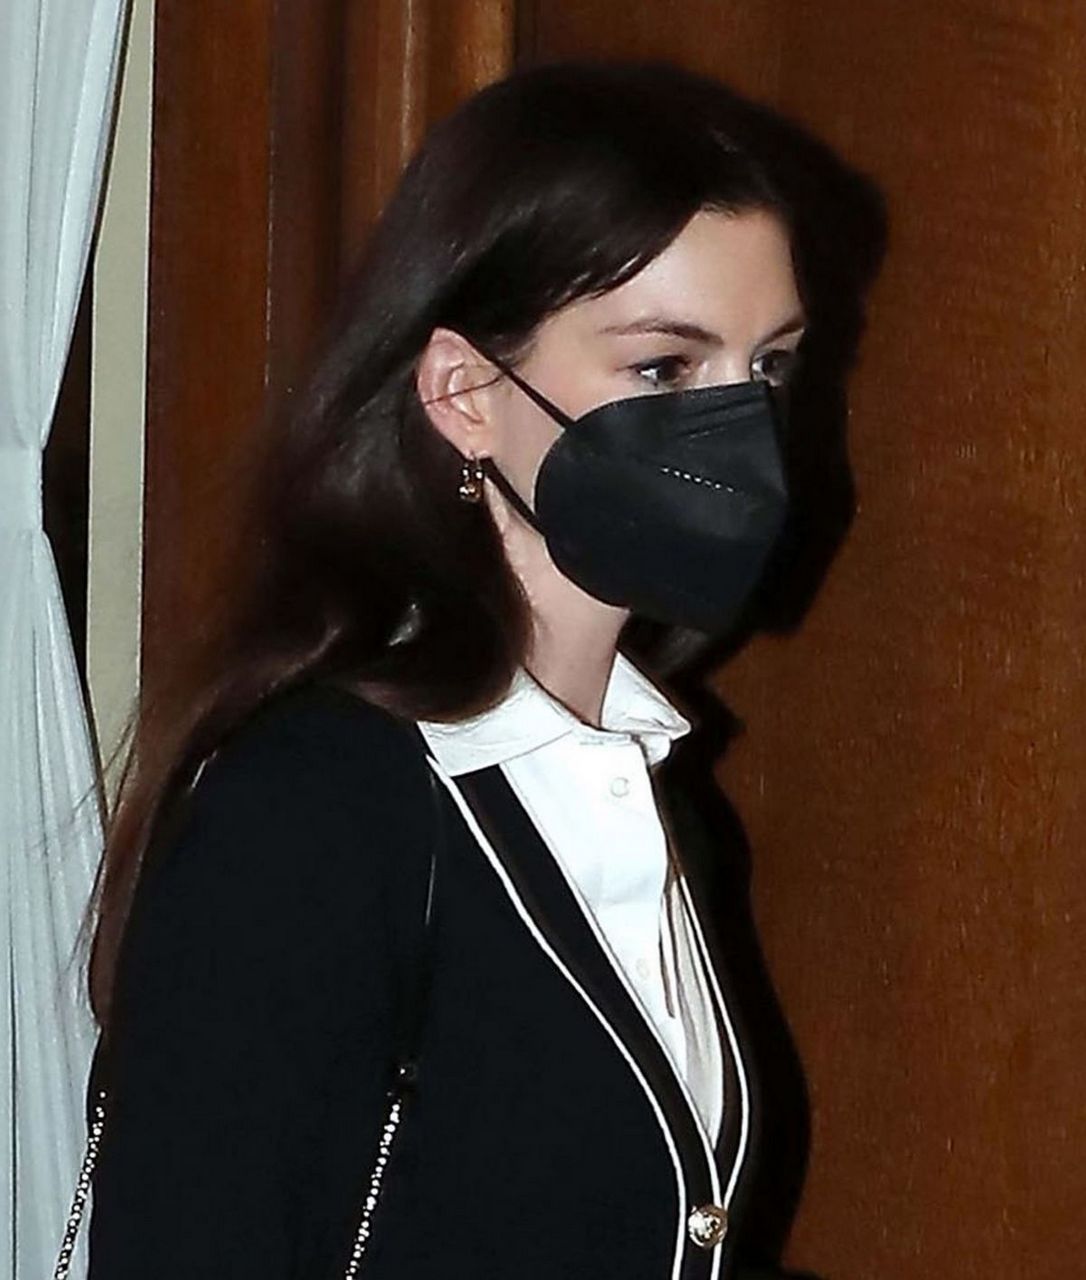 Anne Hathaway Leaves Her Hotel Rome